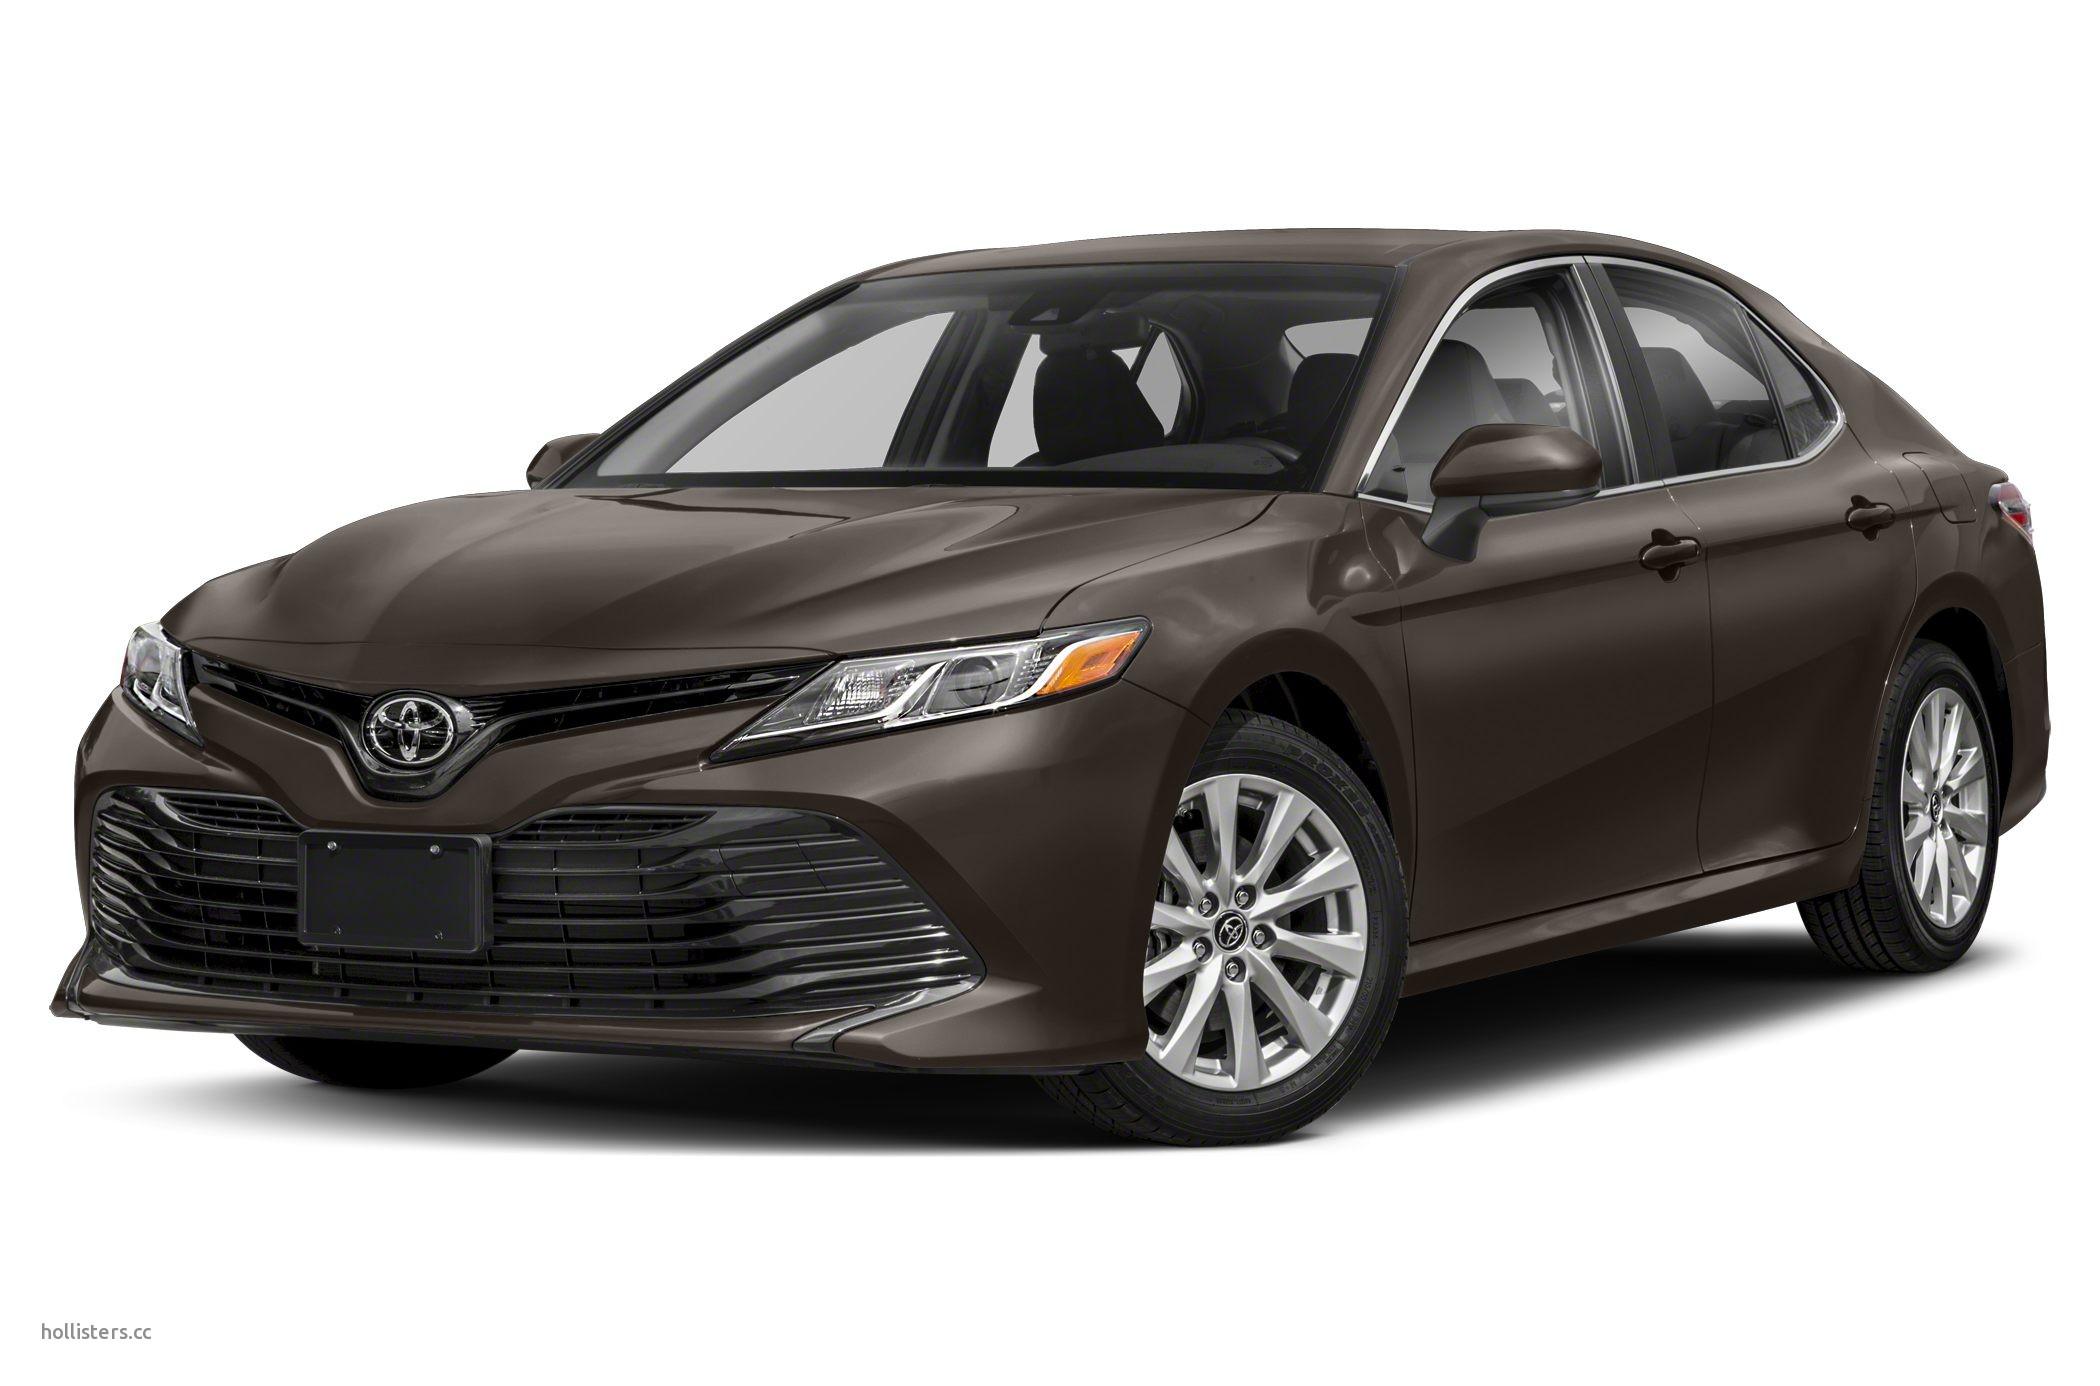 Toyota Camry Xse Wallpaper Luxury 2019 toyota Camry Information